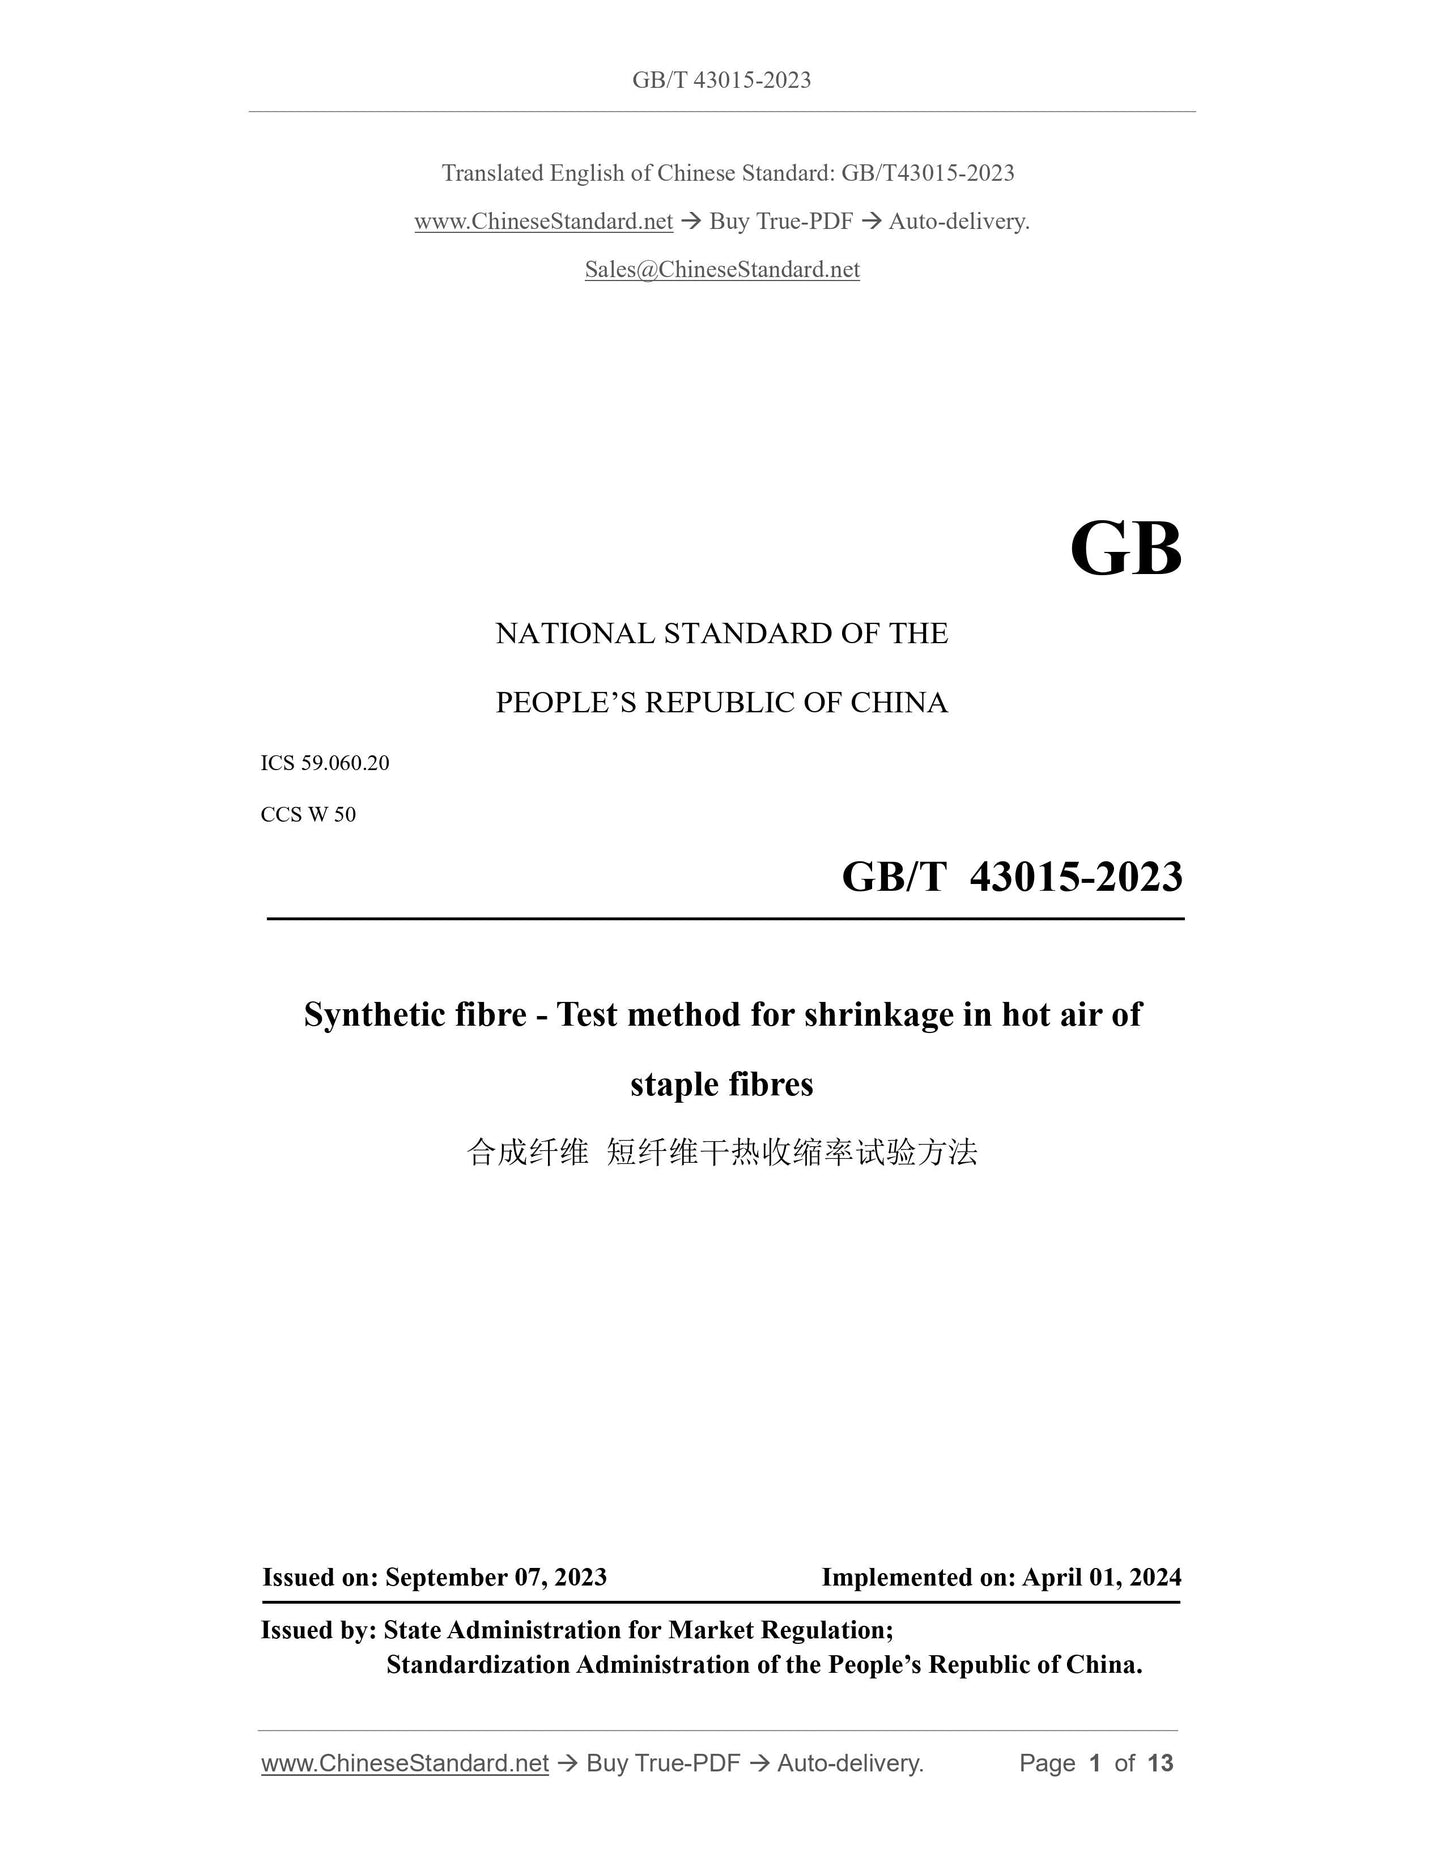 GB/T 43015-2023 Page 1